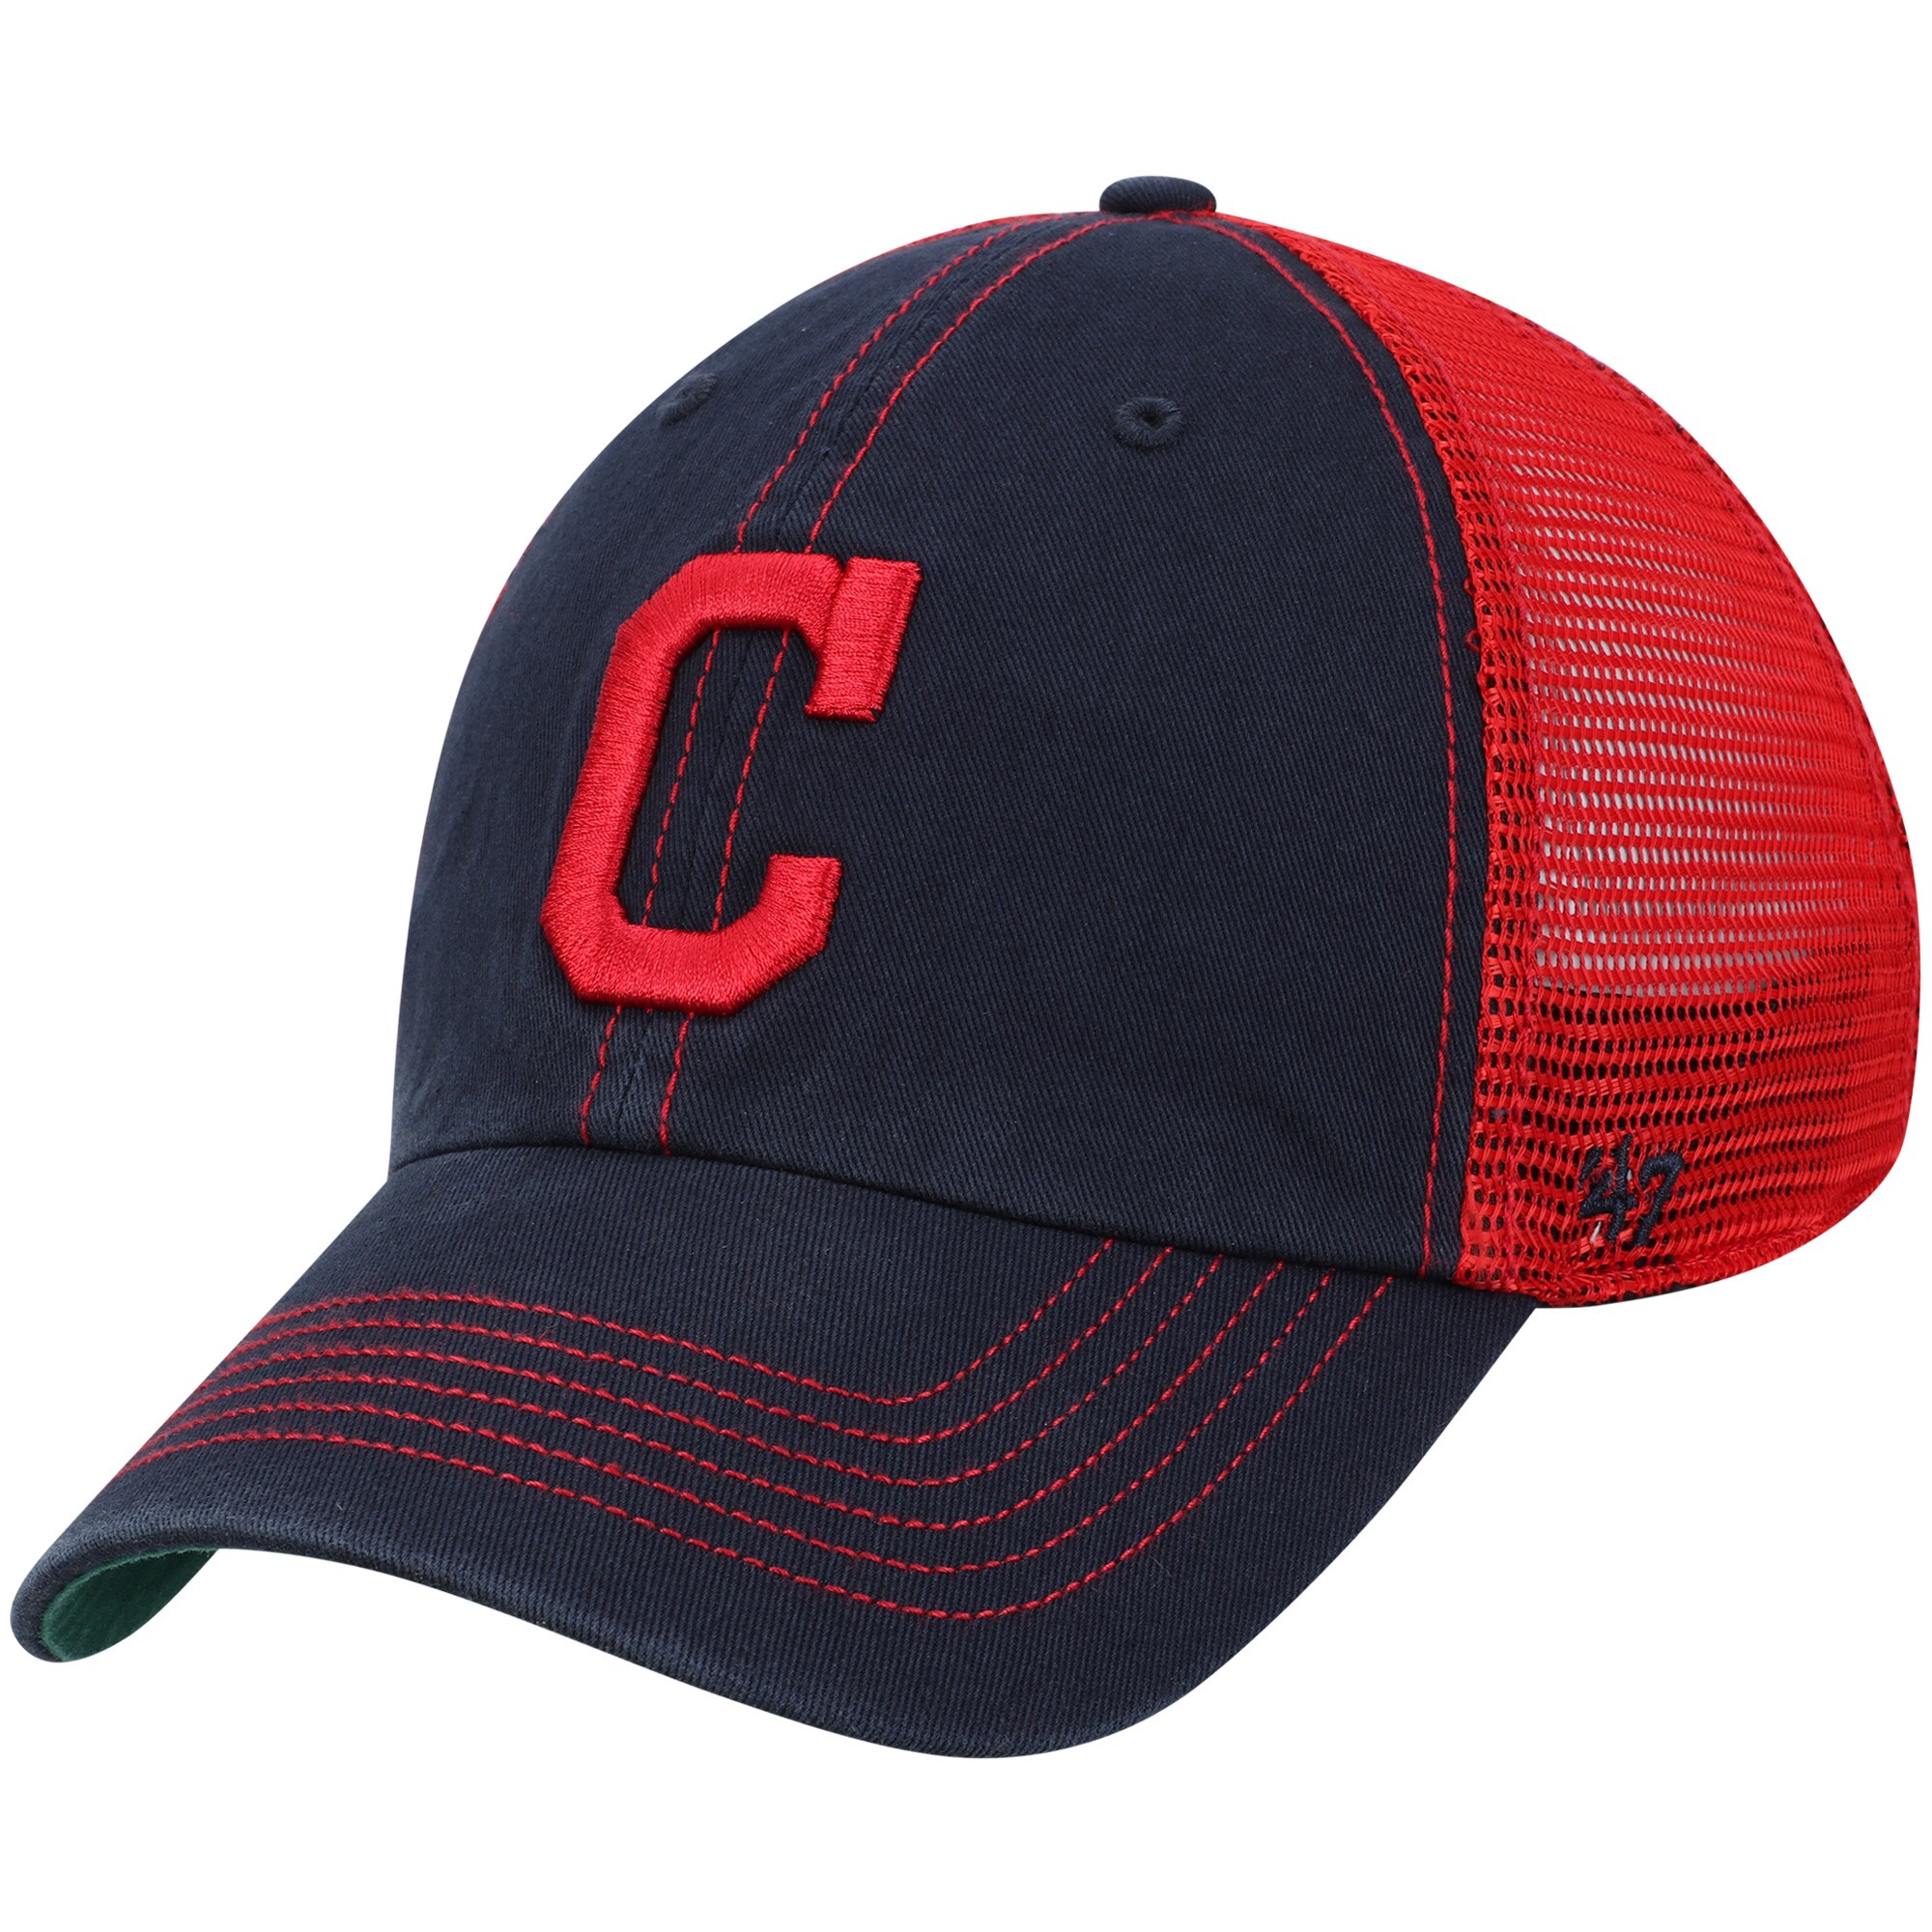 Men's '47 Navy/Red Cleveland Indians Trawler Clean Up Trucker Hat - OSFA - image 1 of 4